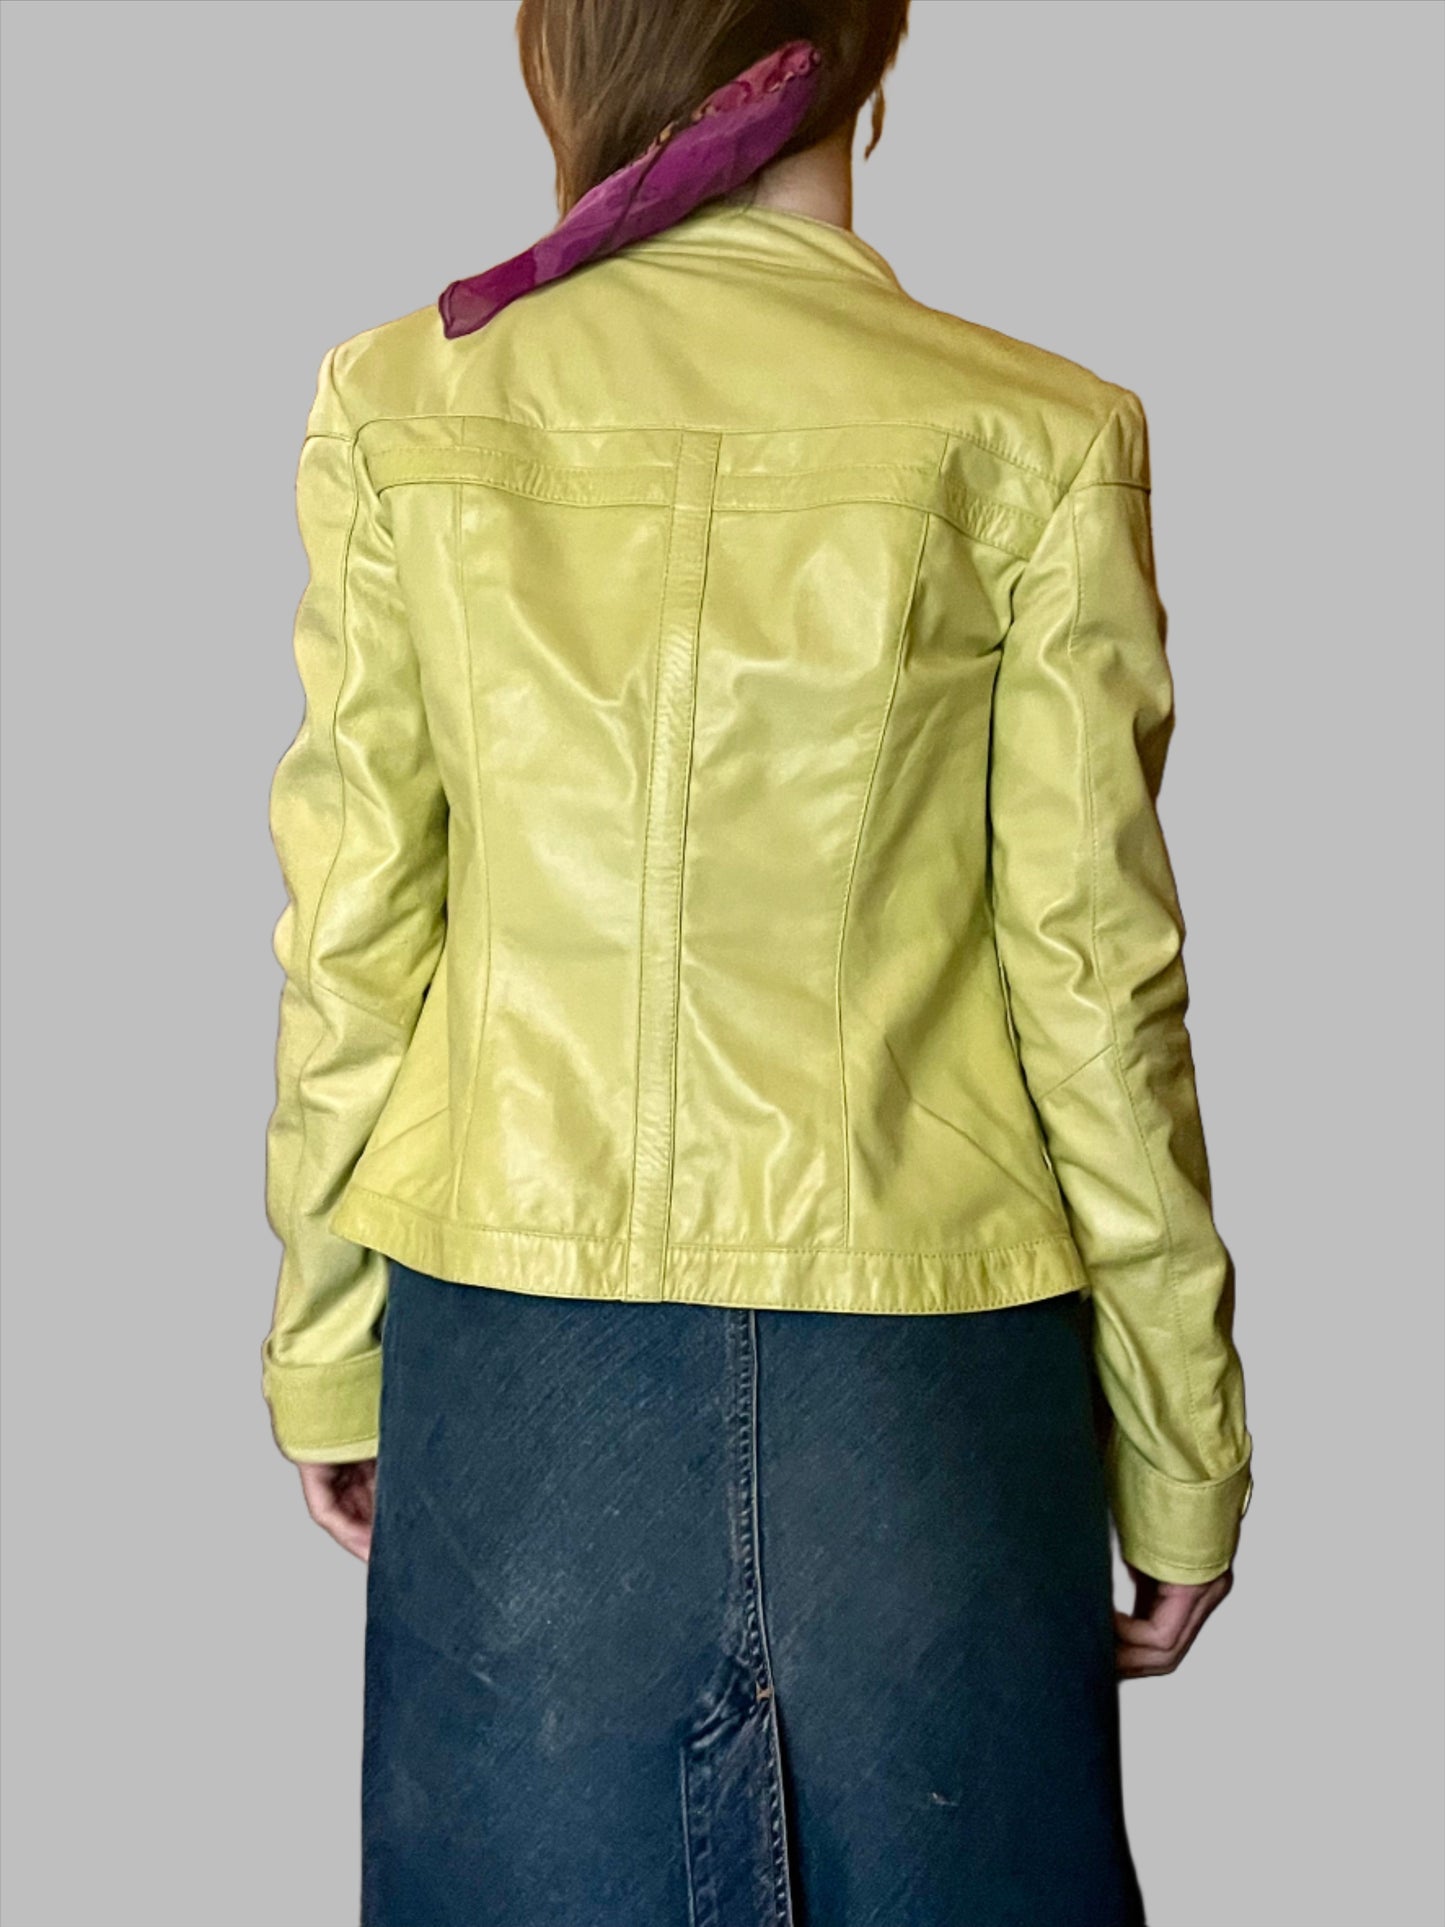 Vintage Versace 80s leather jacket cropped in acid green